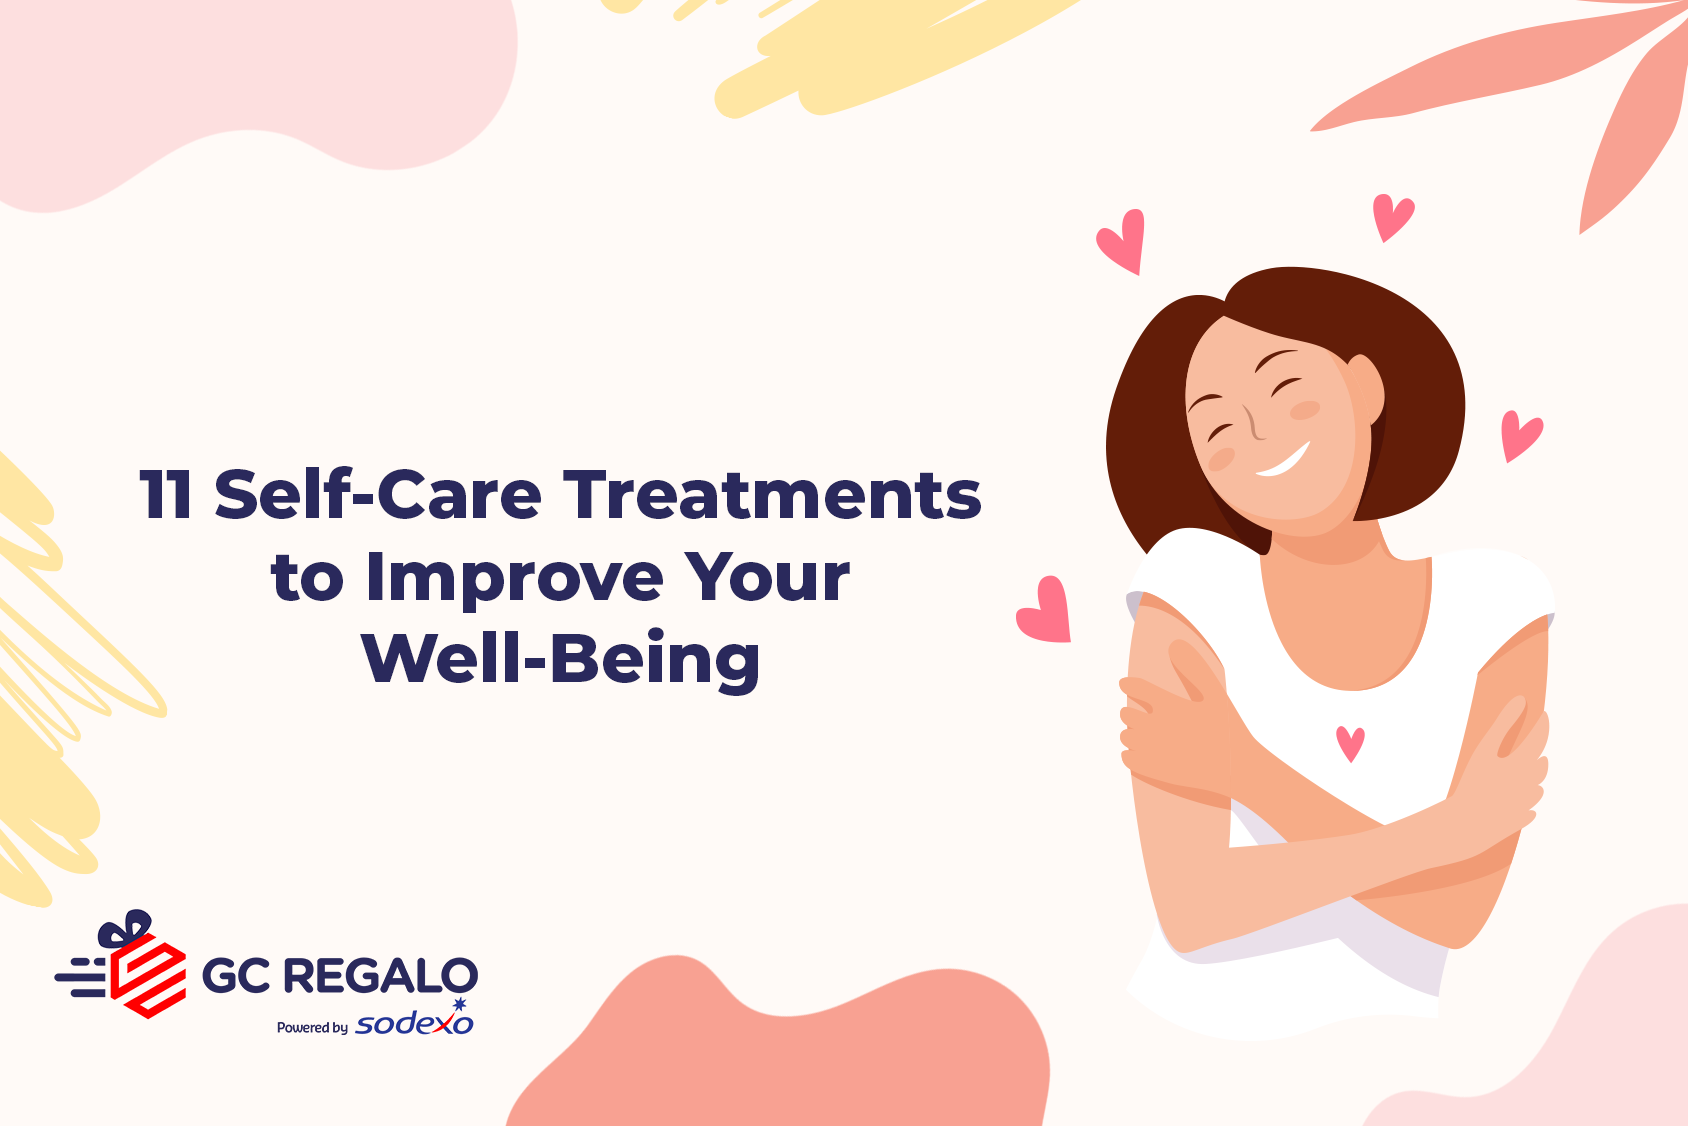 11 Self-Care Treatments to Improve Your Well-Being